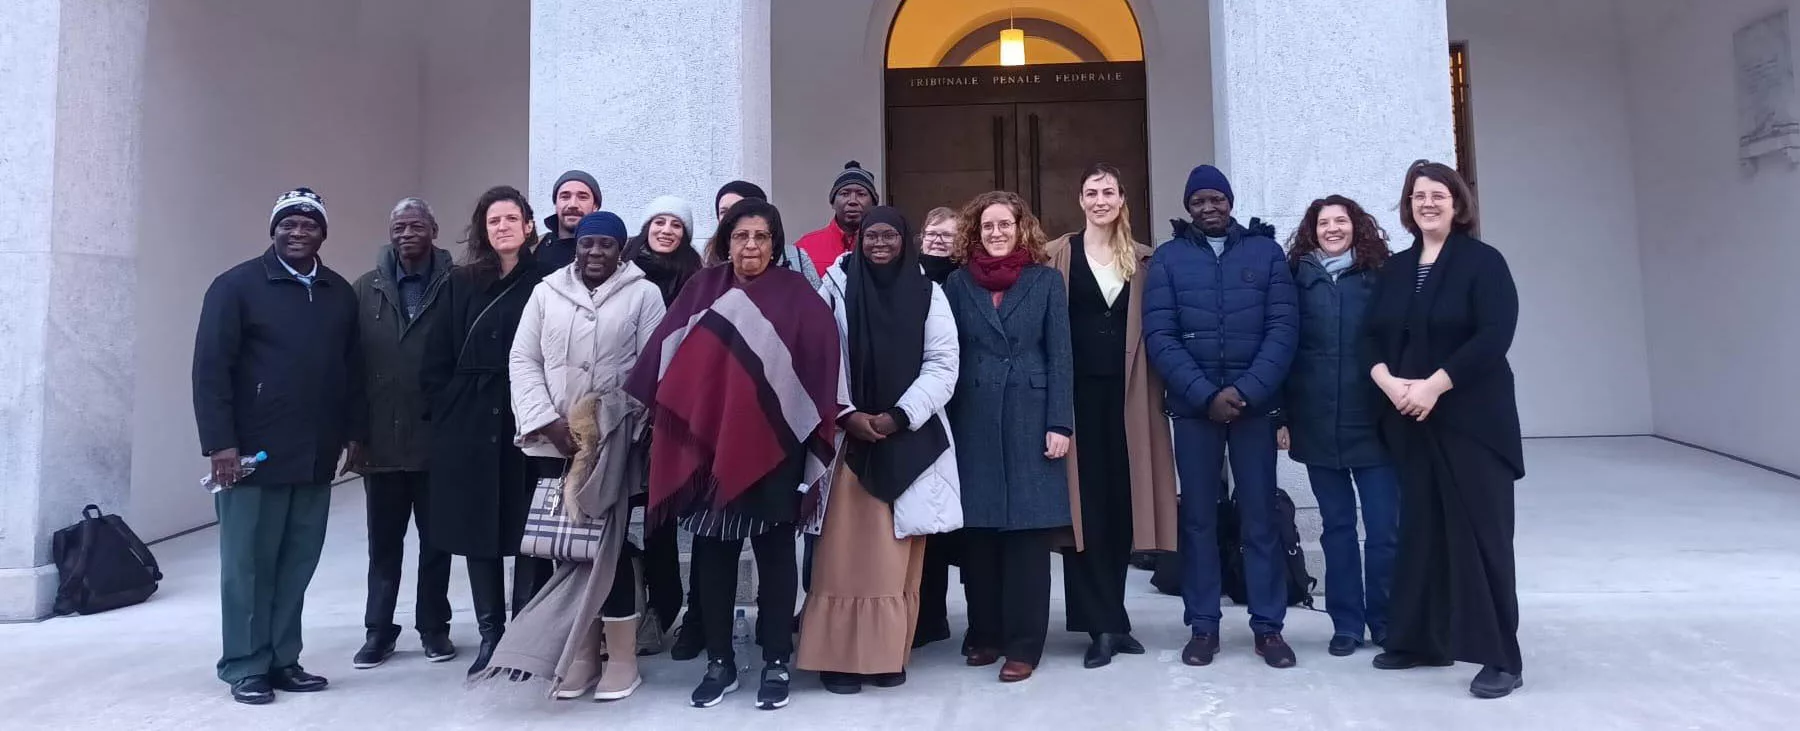 Plaintiffs, plaintiffs’ lawyers and representatives of TRIAL International before the FCC in Bellinzona during the second week of the trial of Ousman Sonko in Switzerland.